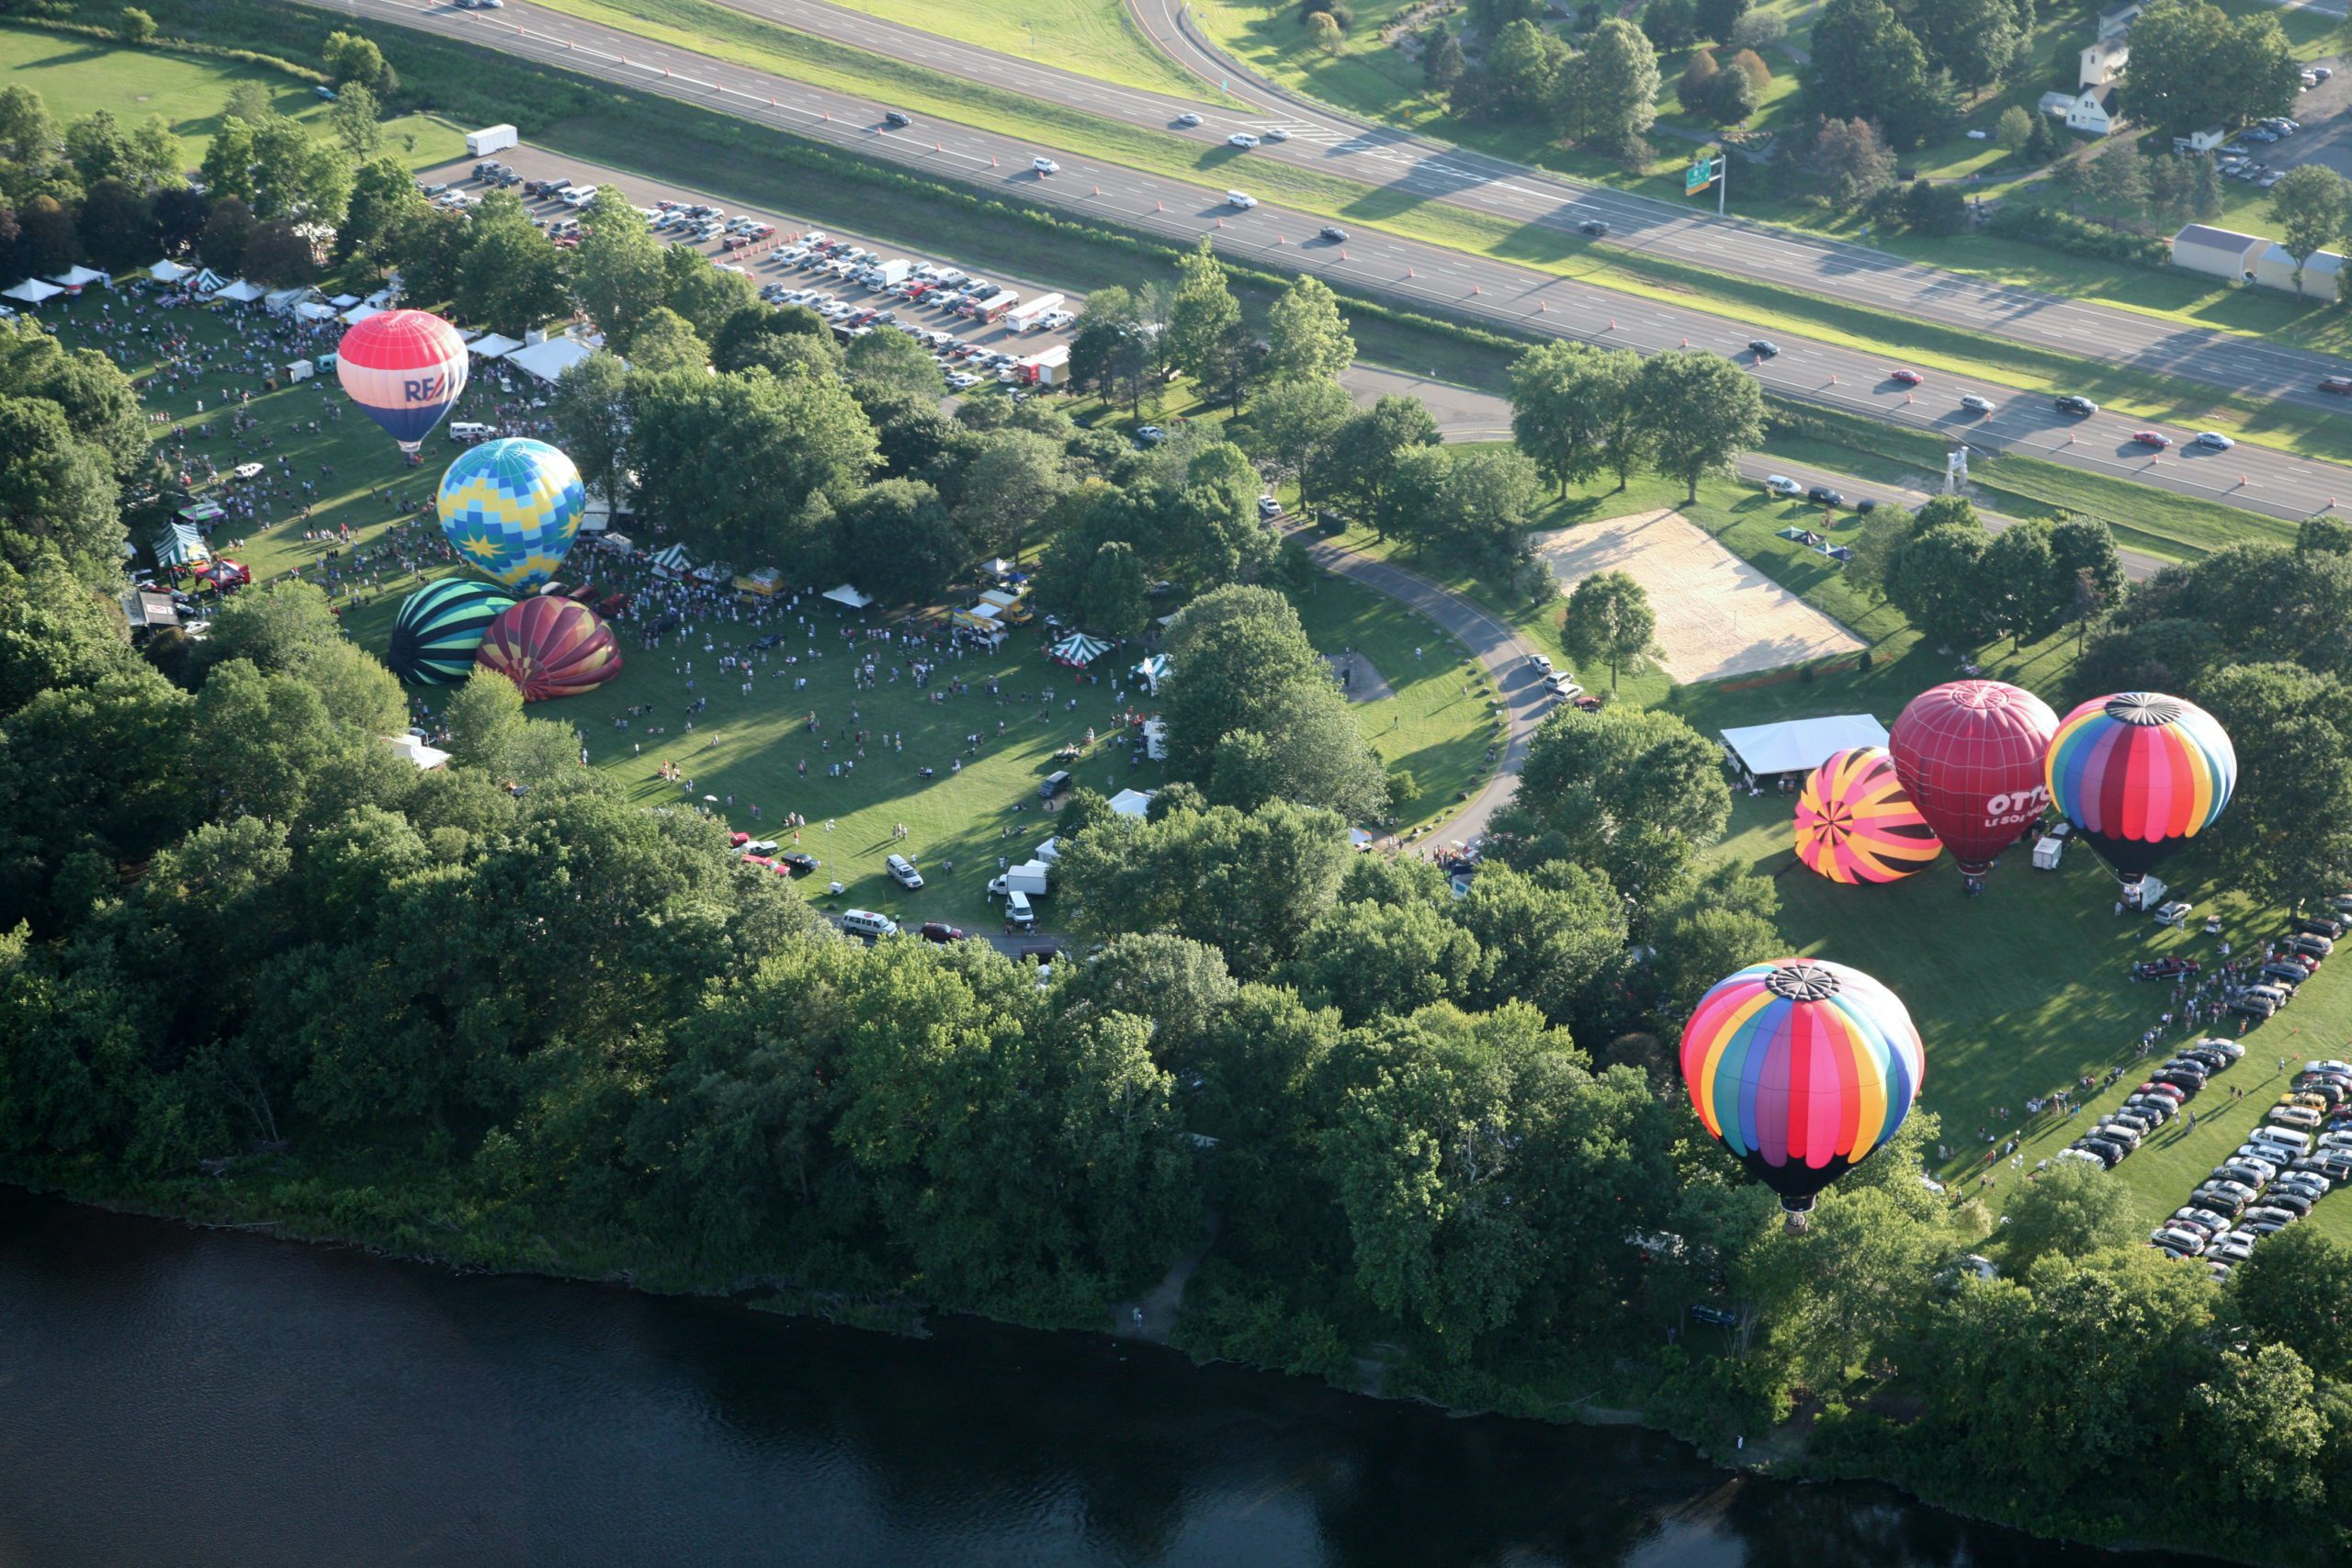 Hot air balloons lifting off at Spiedie Fest